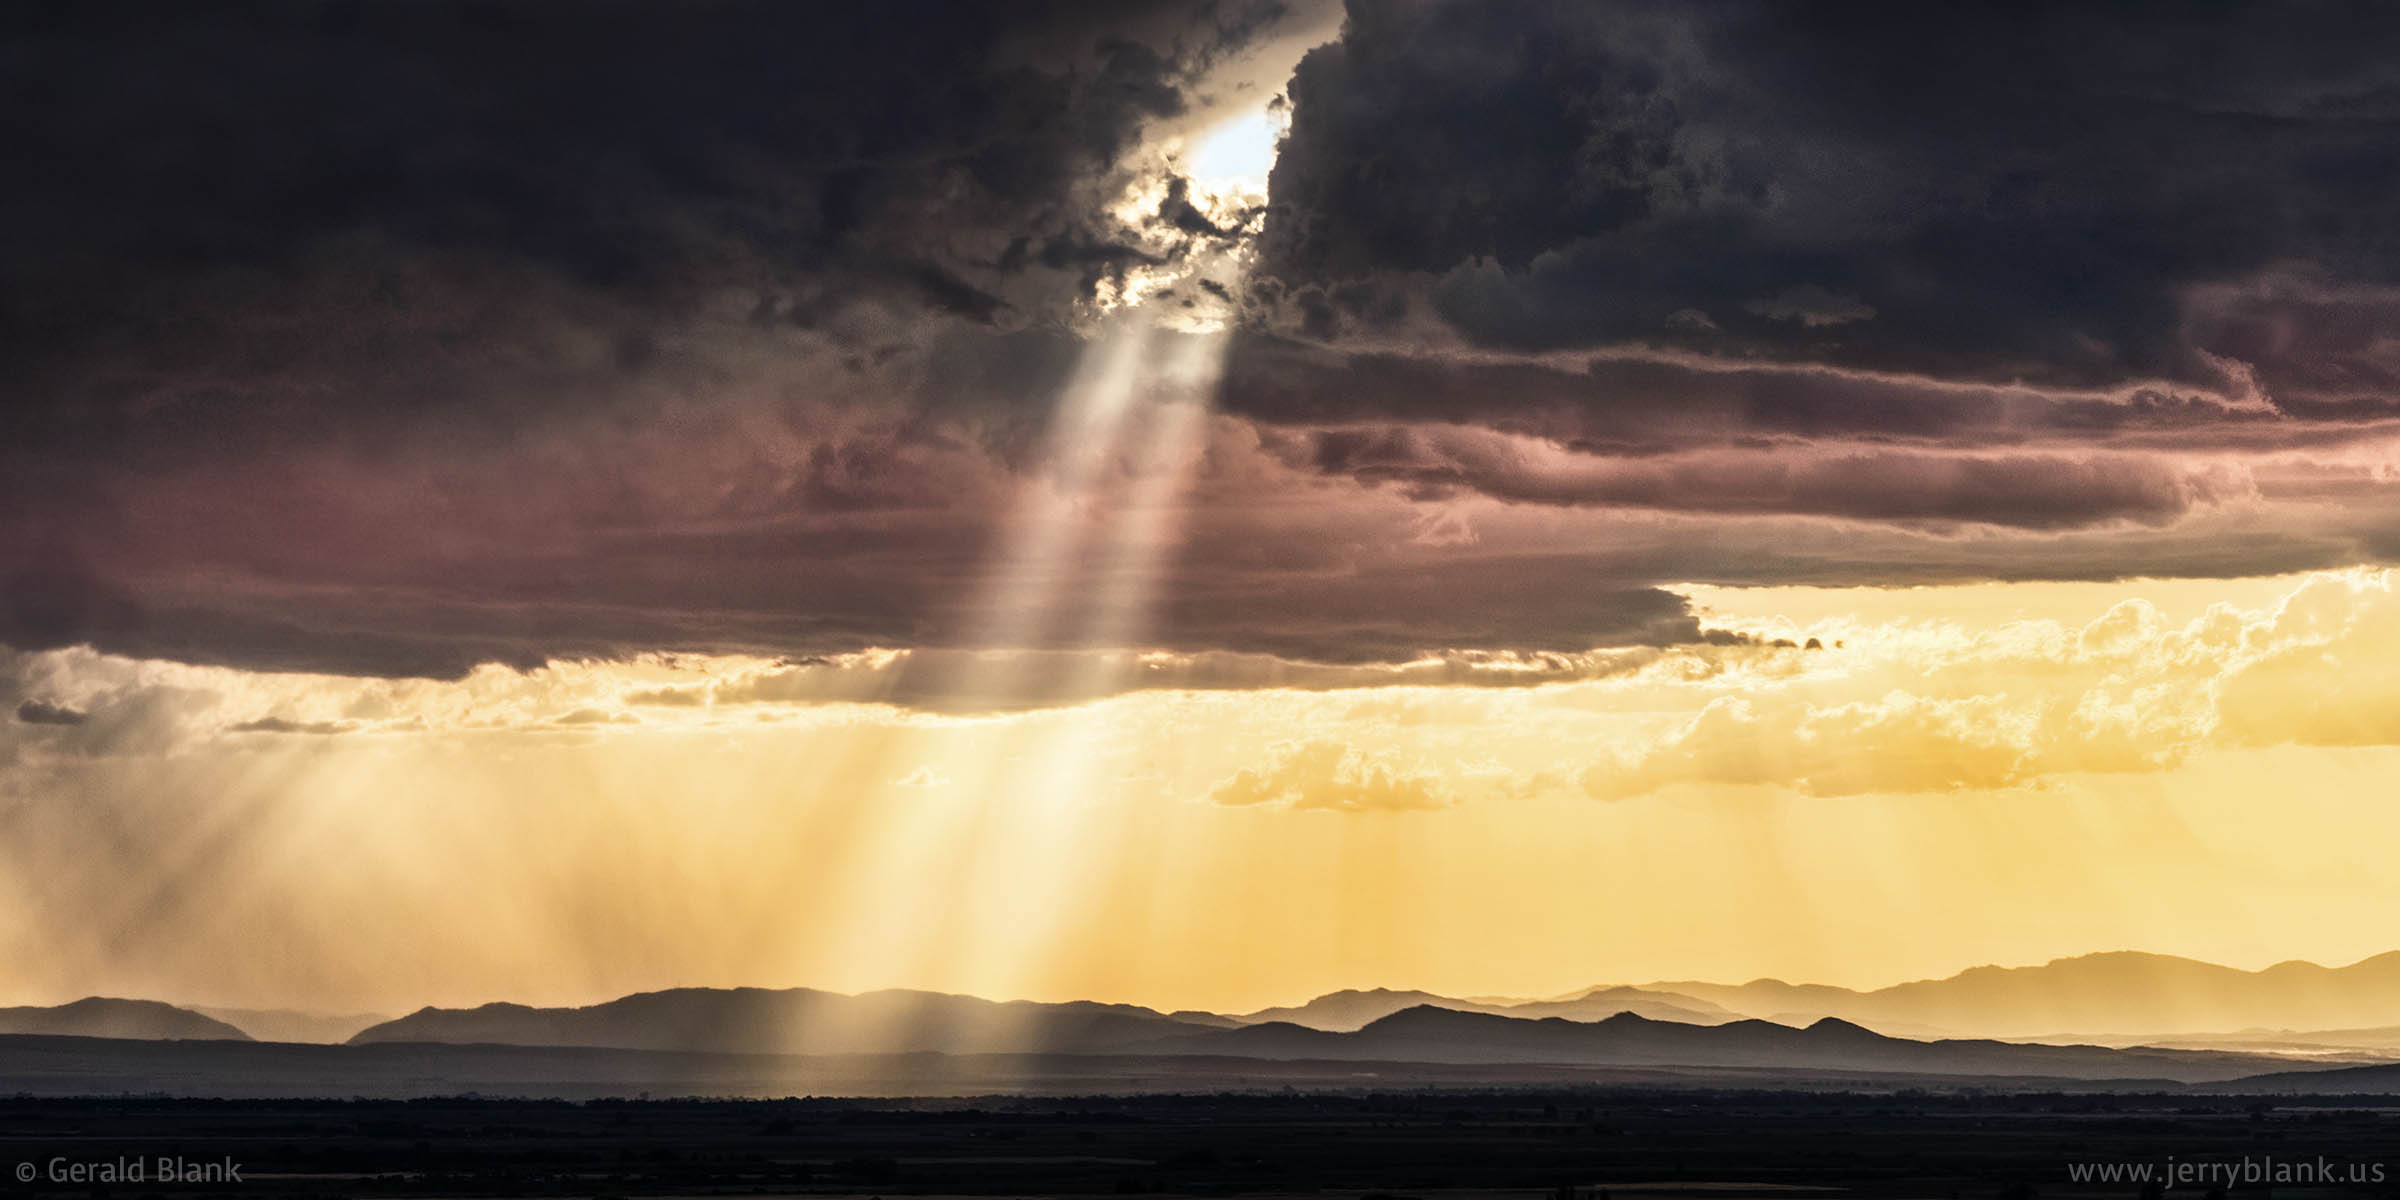 #10196 - Rays of sunlight pierce a storm cloud above the Gallatin Valley in western Montana - photo by Jerry Blank